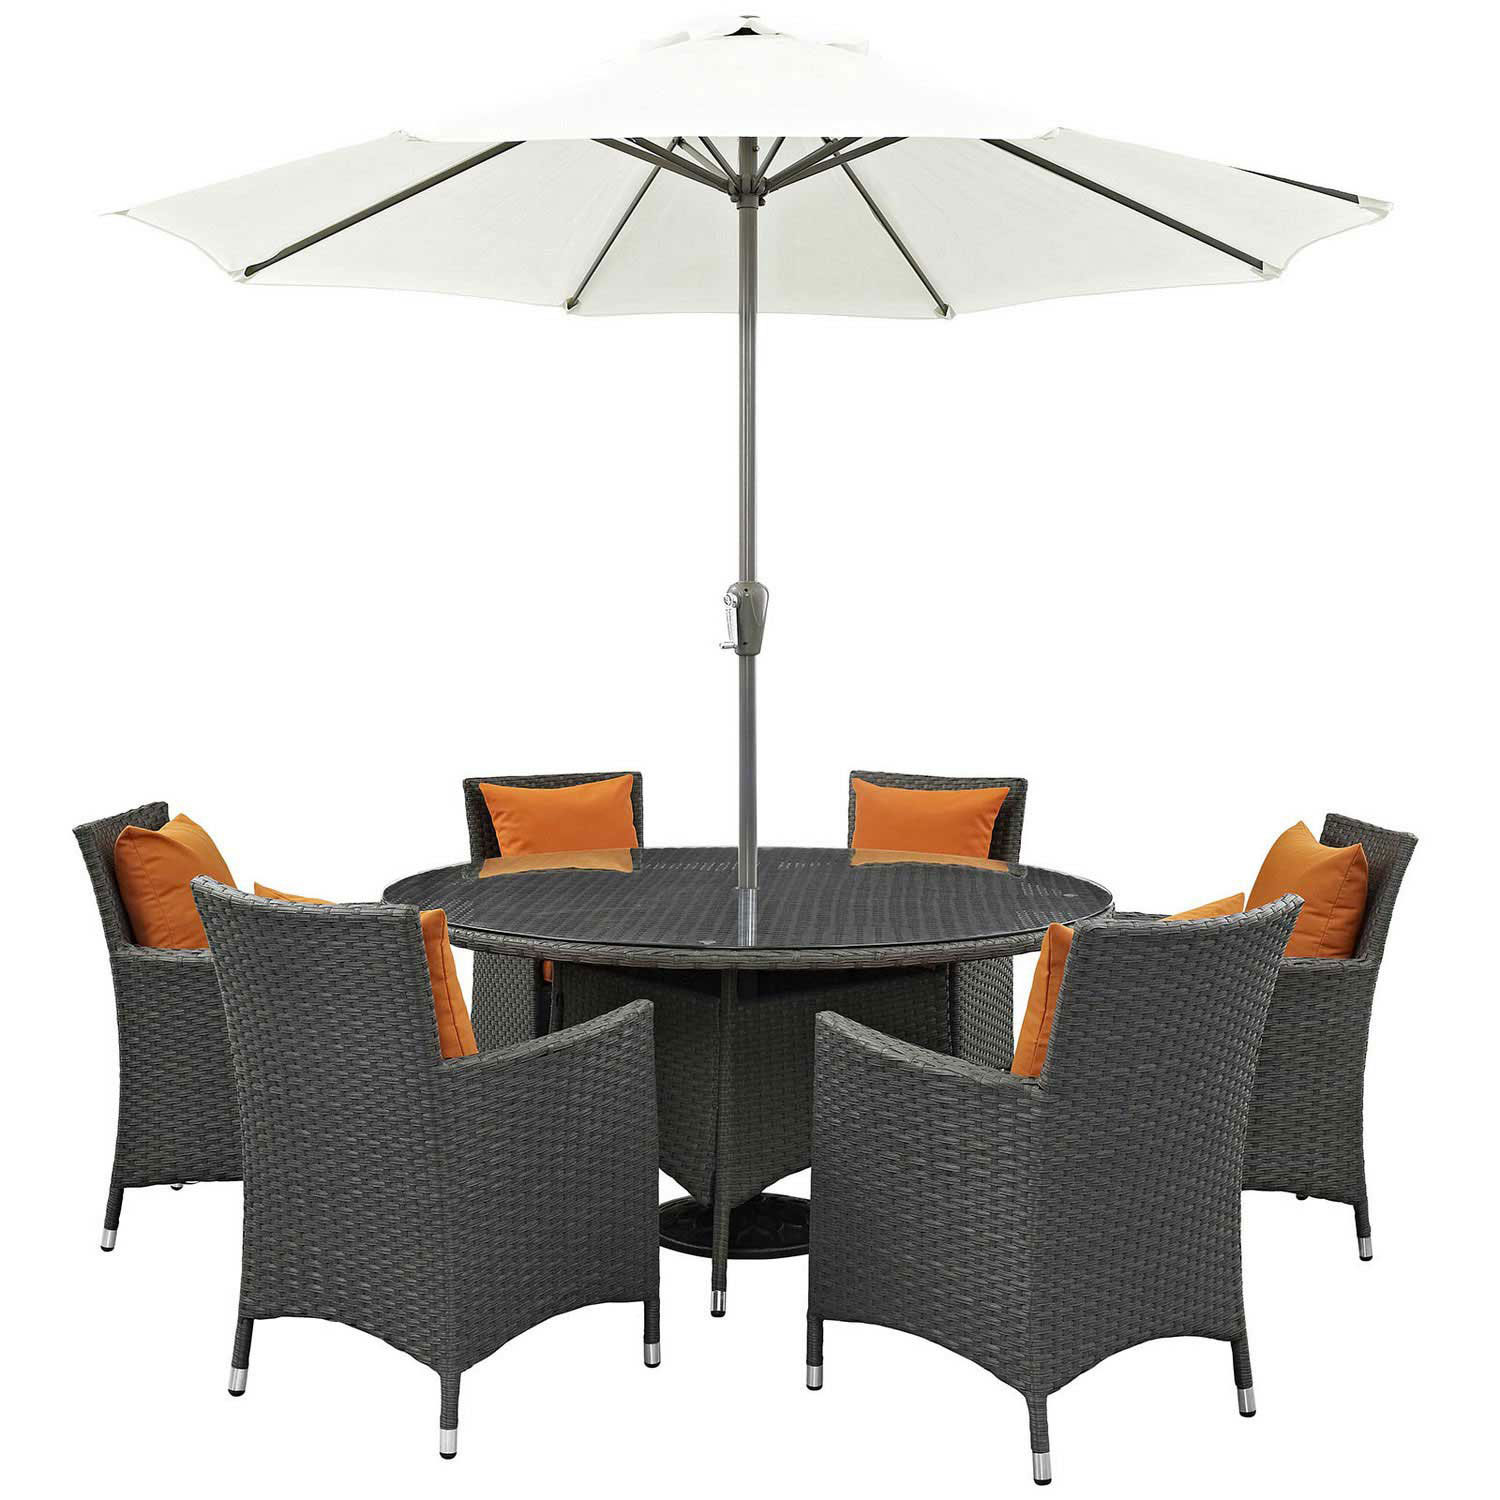 Modway Sojourn 8 Piece Outdoor Patio Sunbrella Dining Set - Canvas Tuscan